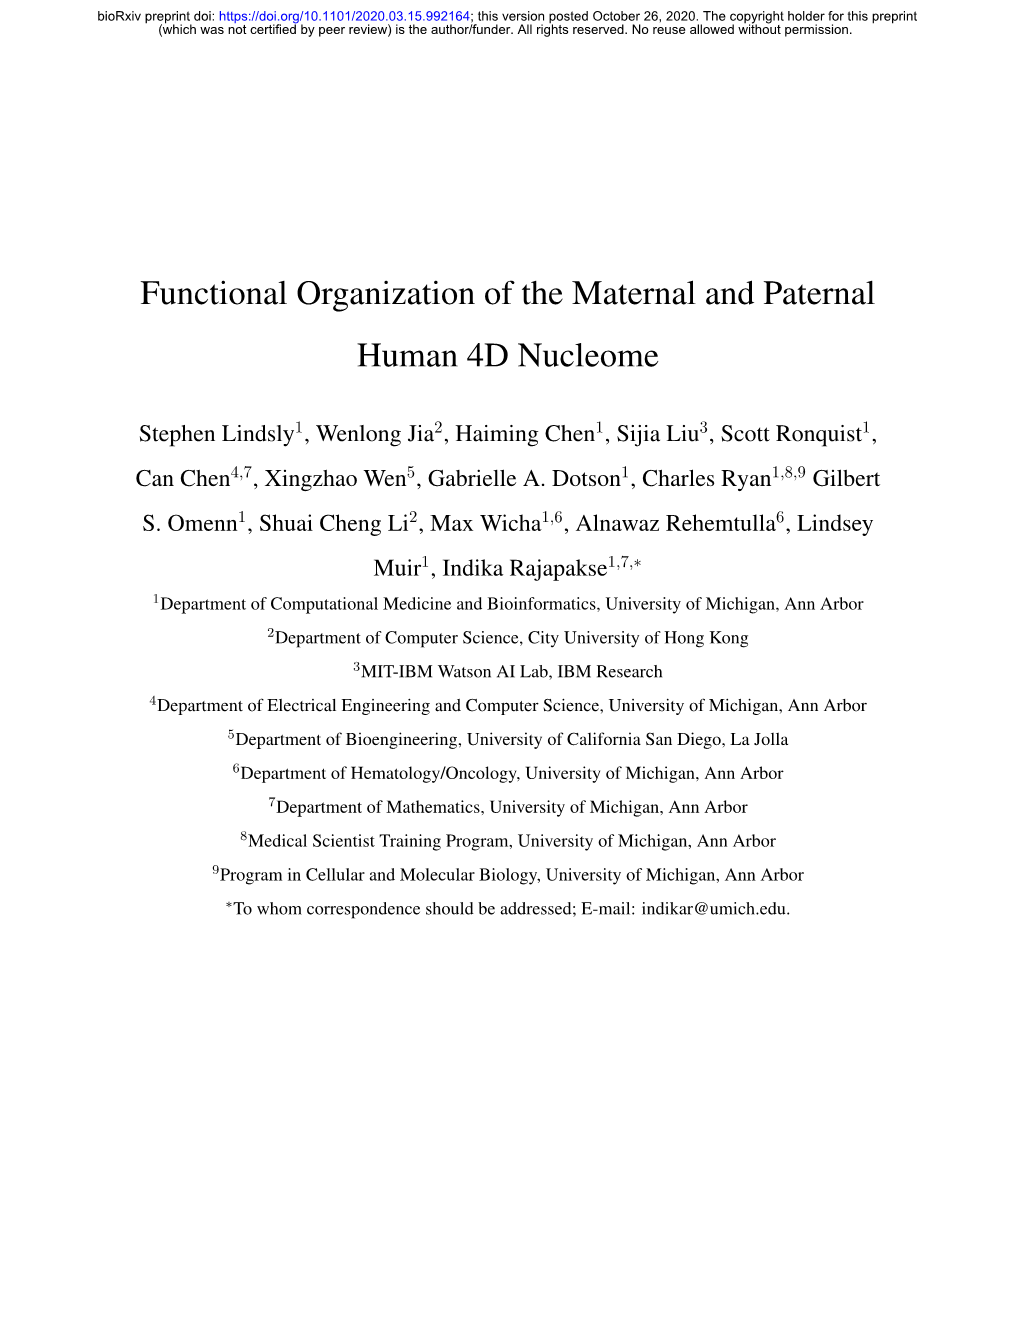 Functional Organization of the Maternal and Paternal Human 4D Nucleome